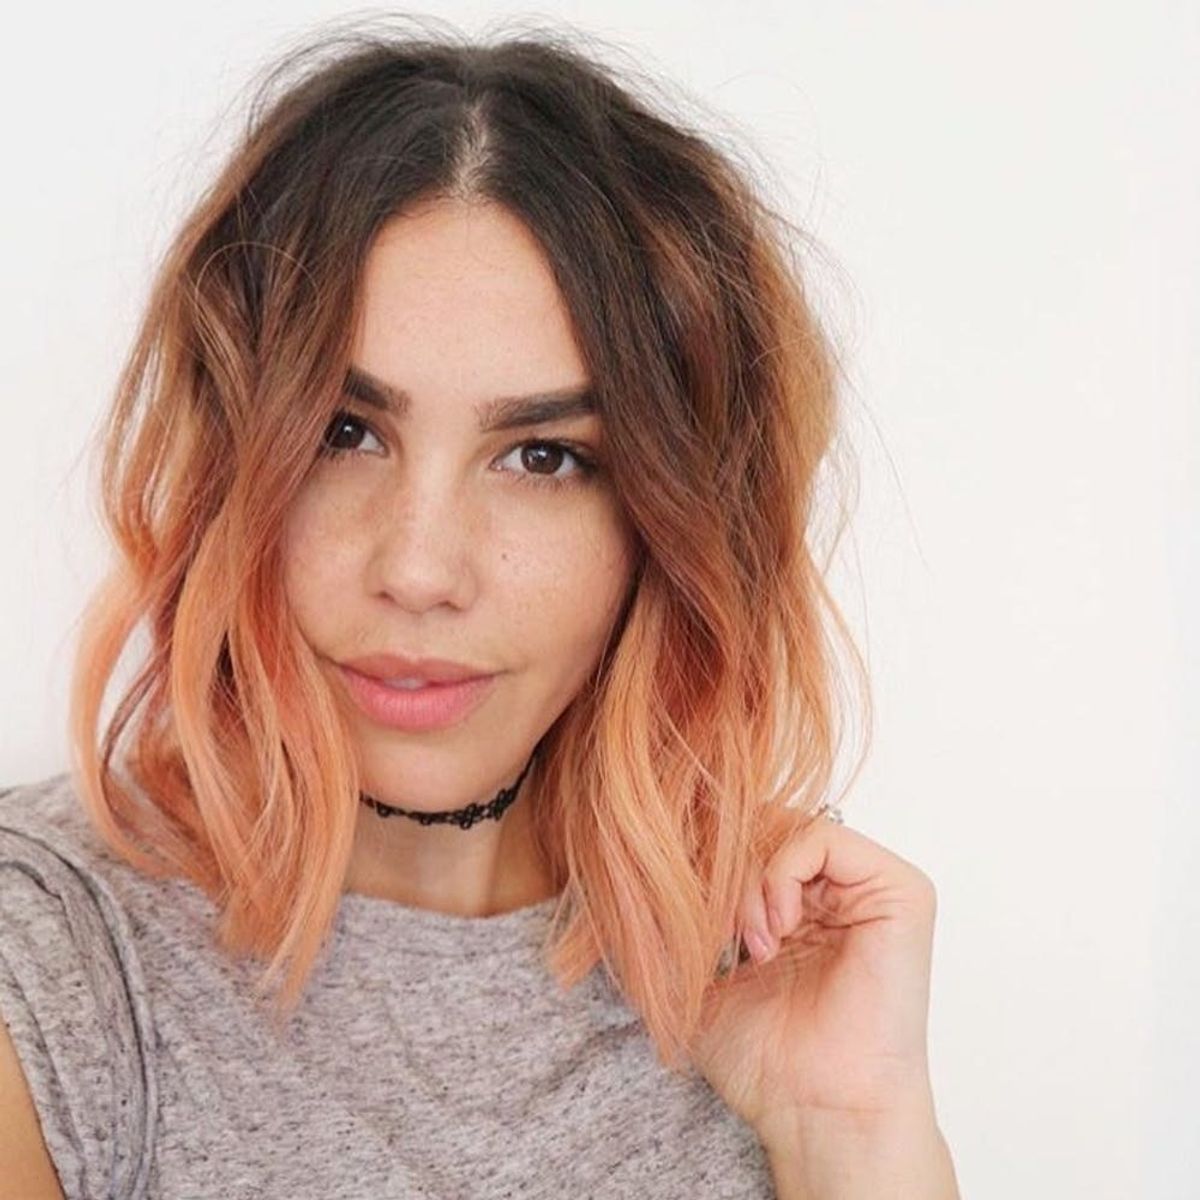 8 Reasons Why Blorange Hair Is 2017’s Coolest Trend